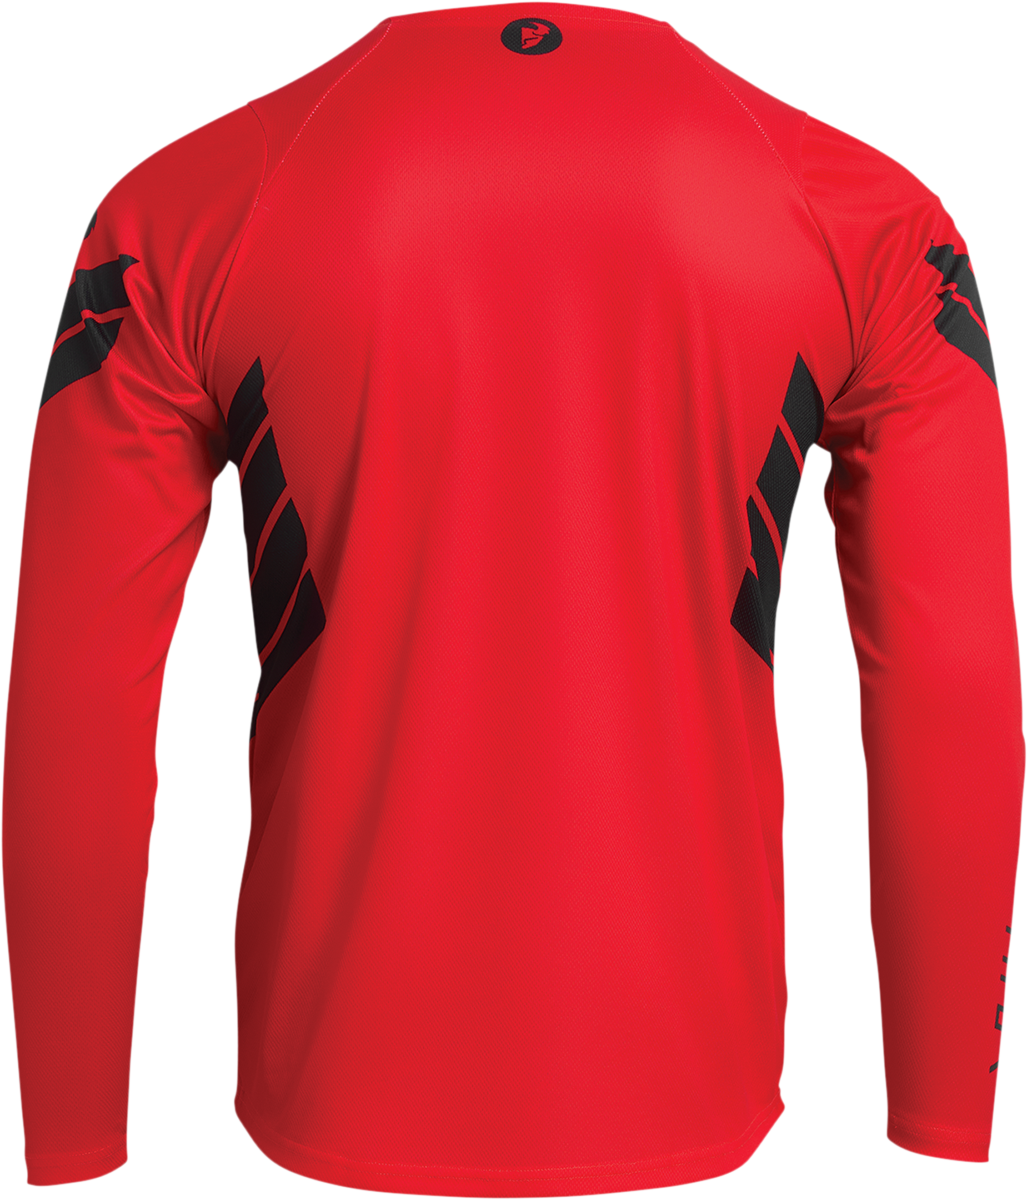 THOR Assist Sting Long-Sleeve Jersey - Red - XS 5020-0031